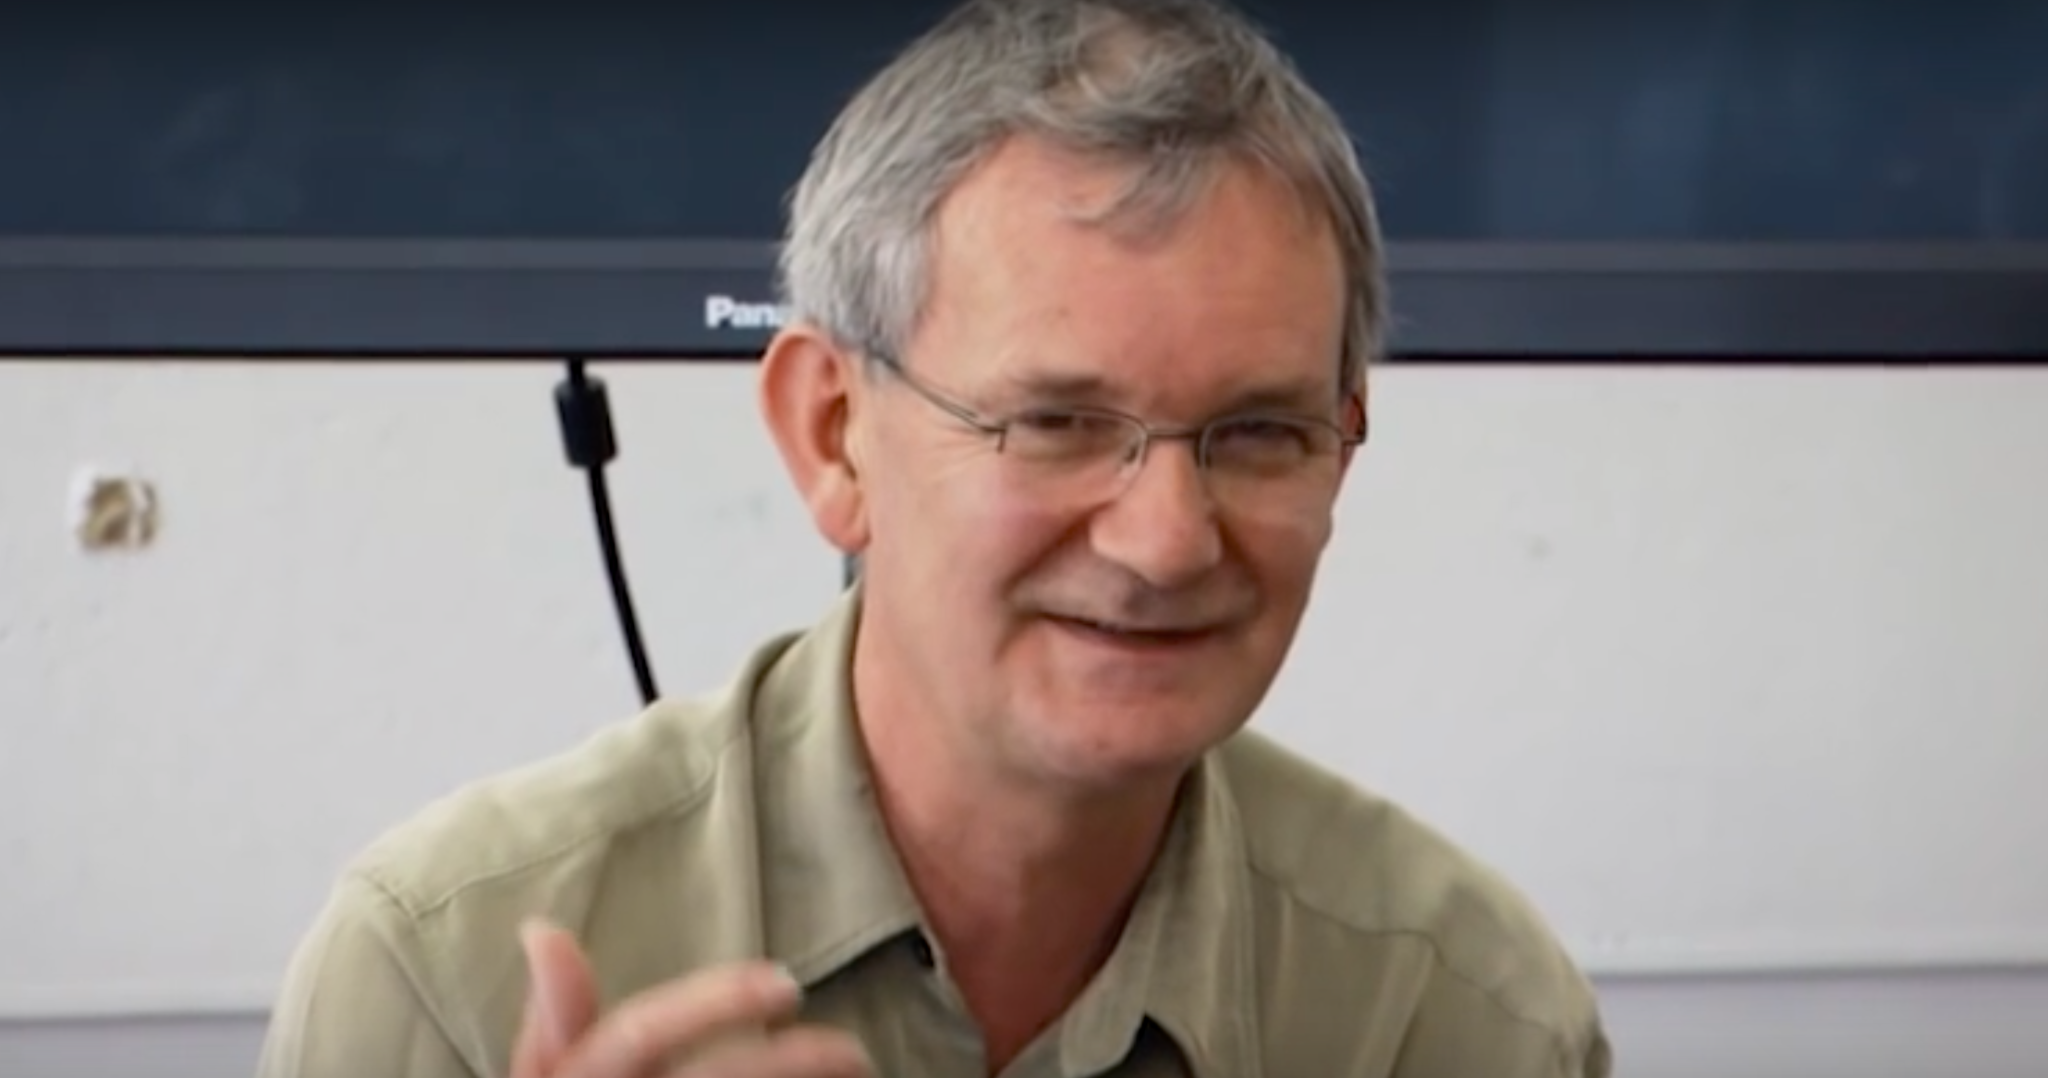 Magnum Photographer Martin Parr Offers Young Photographers Advice